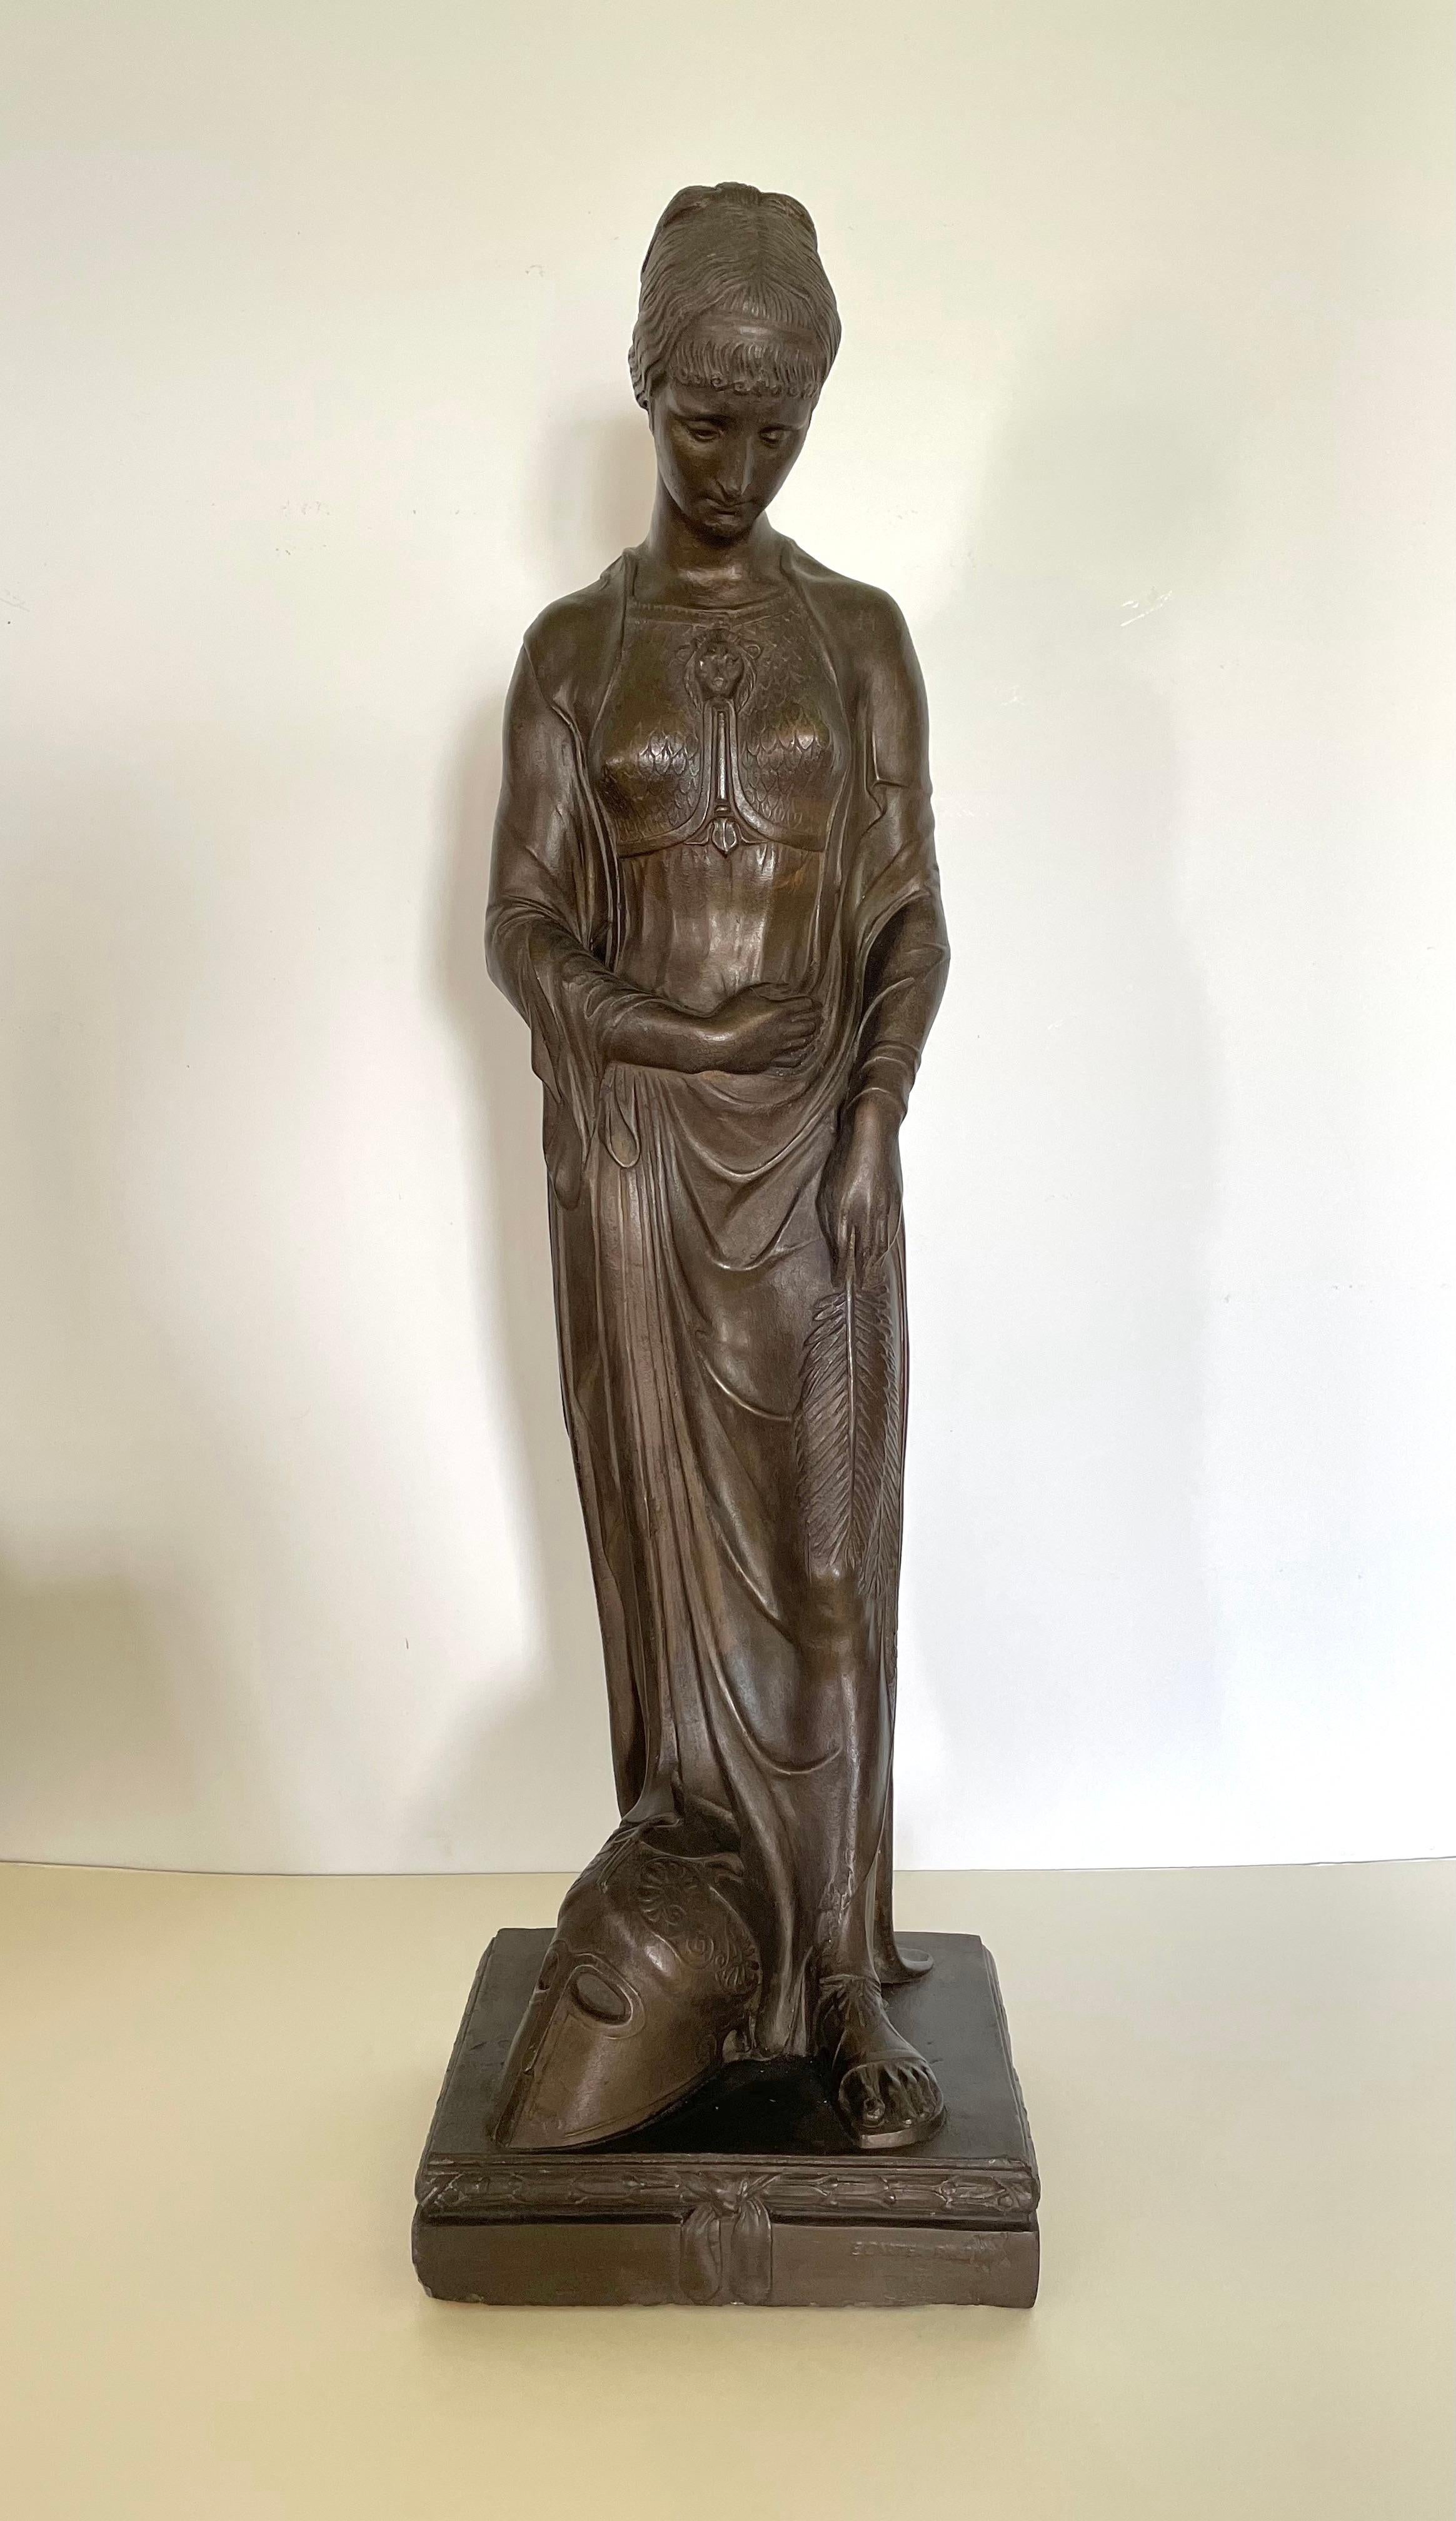 EDWARD CARTER PRESTON
(1885-1965)

Athena

Signed: E CARTER PRESTON
Bronzed plaster

59 cm., 23 ¼ in. high

Edward Carter Preston is best known as the designer of the bronze memorial plaques presented to the families of British servicemen and women